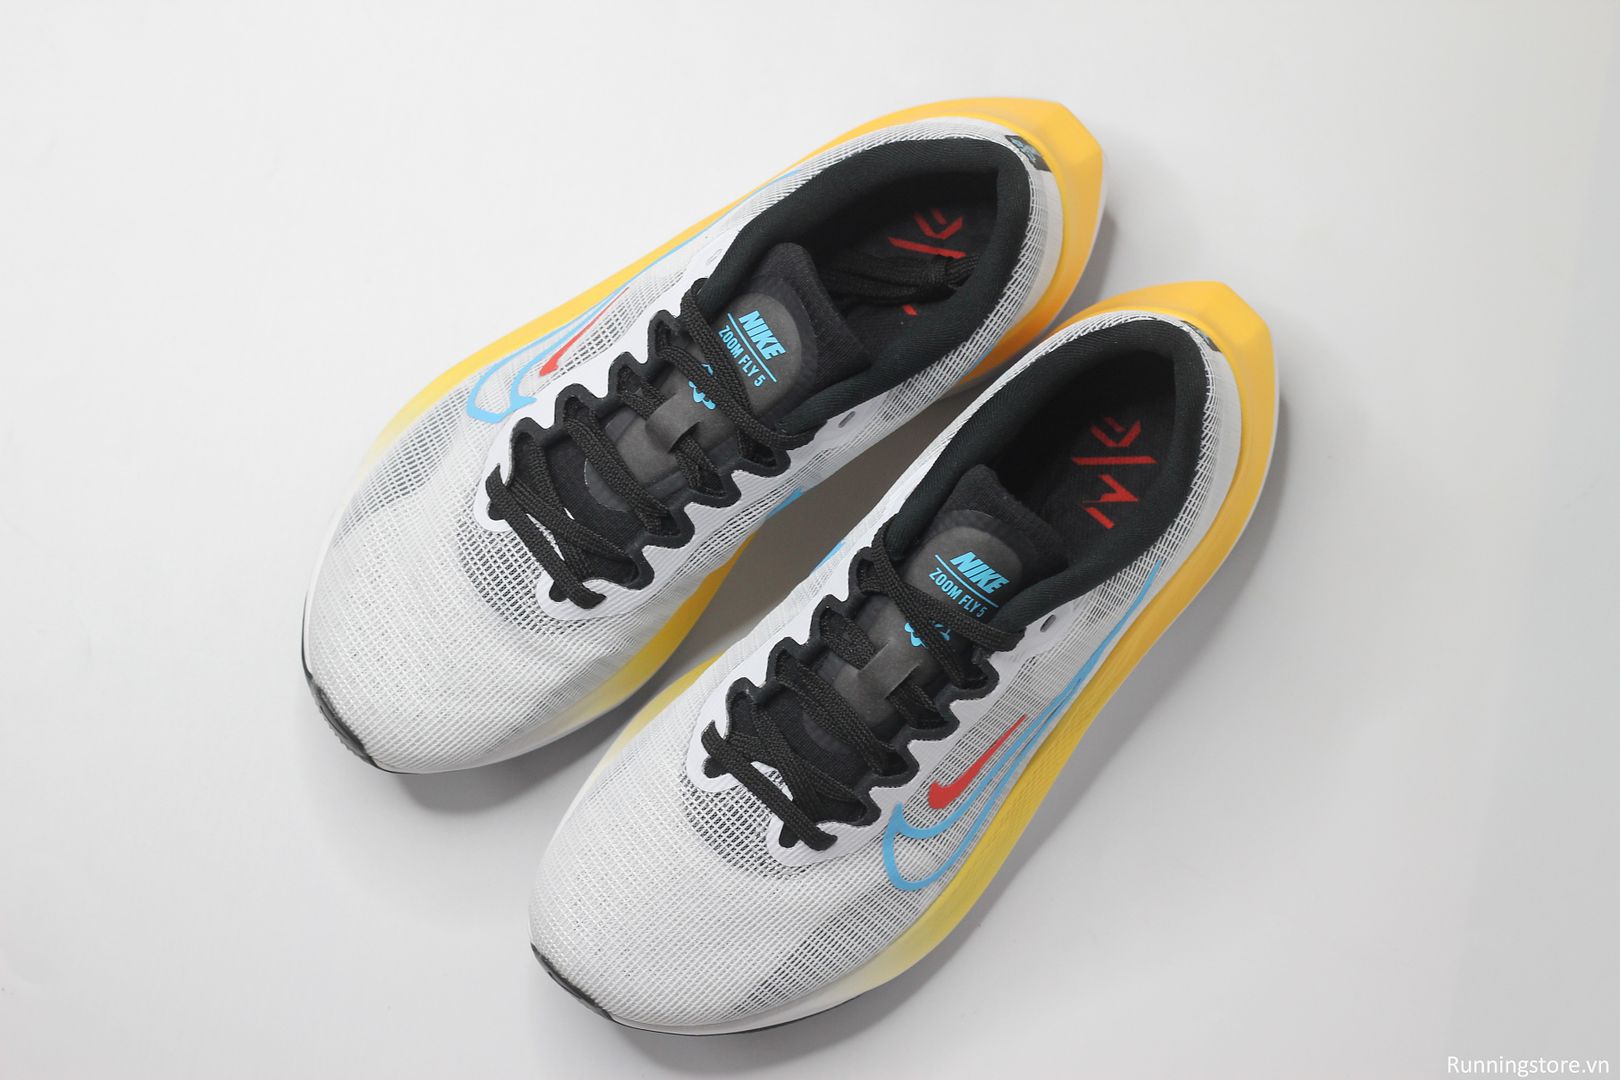 Nike Zoom Fly 5- Black/ White/ Picante Red/ Baltic Blue DM8974-002 